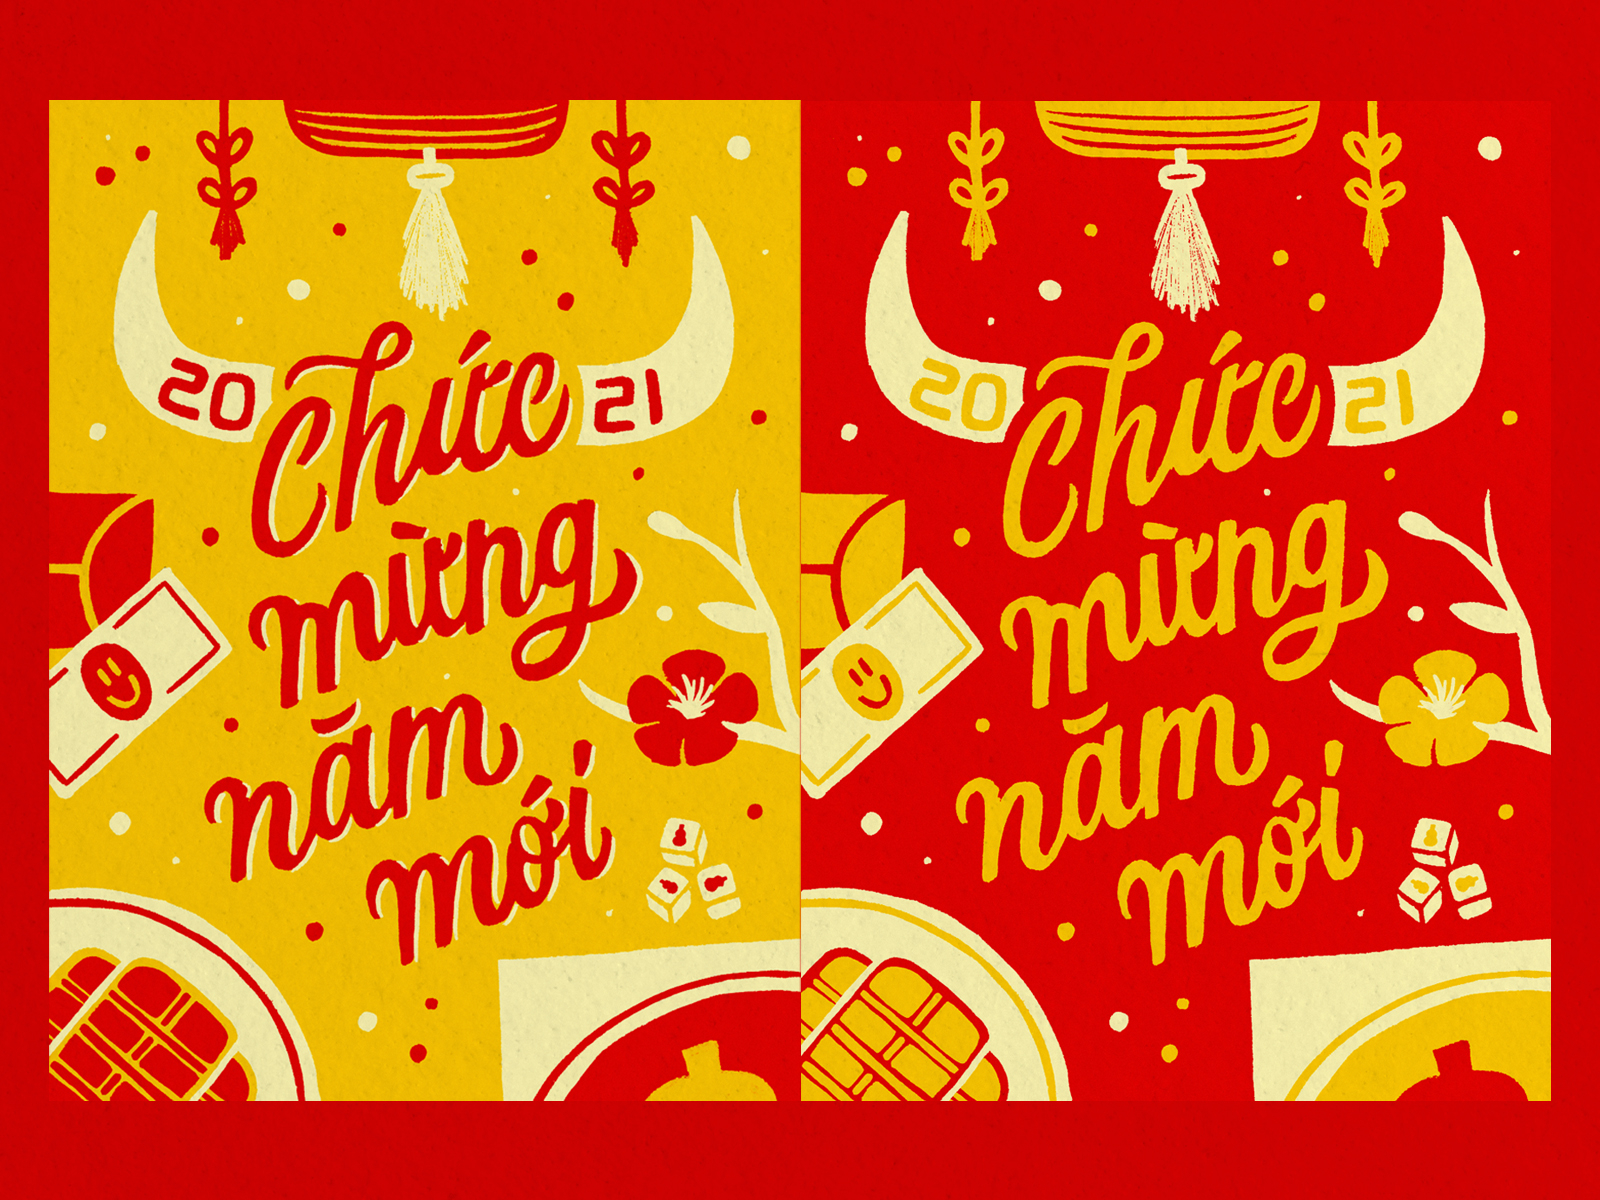 Lunar New Year 2021 2021 logo banh tet chuc mung nam moi design handlettering illustration lettering lunar new year year of the ox